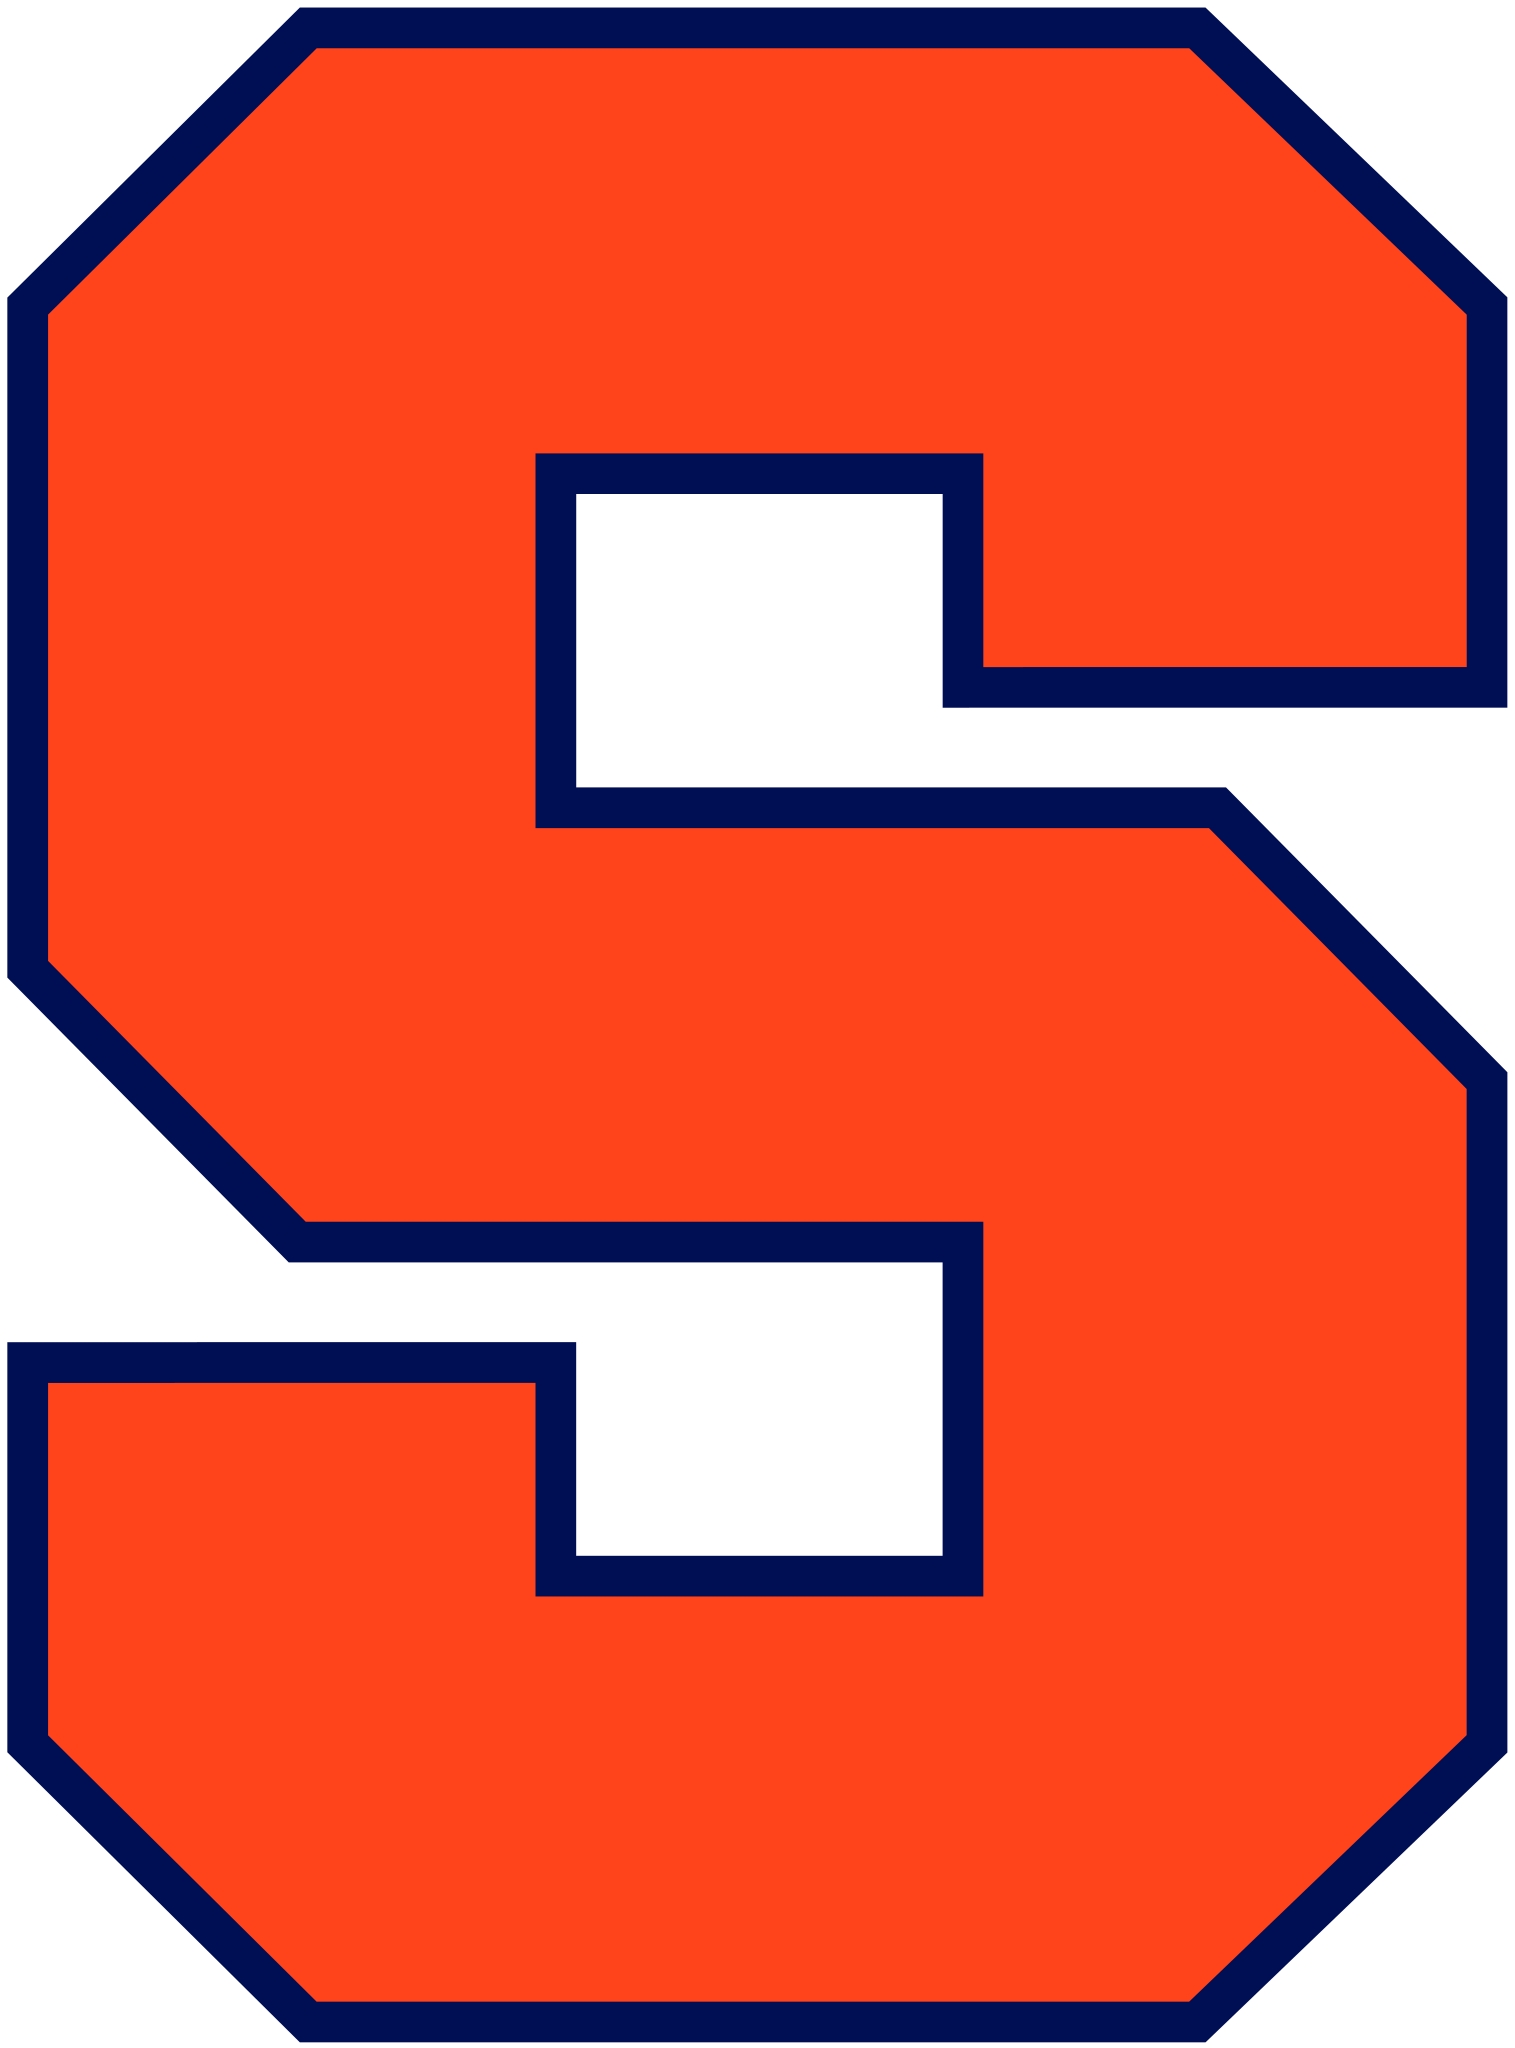 the letter s is orange and blue with a white square in the middle .